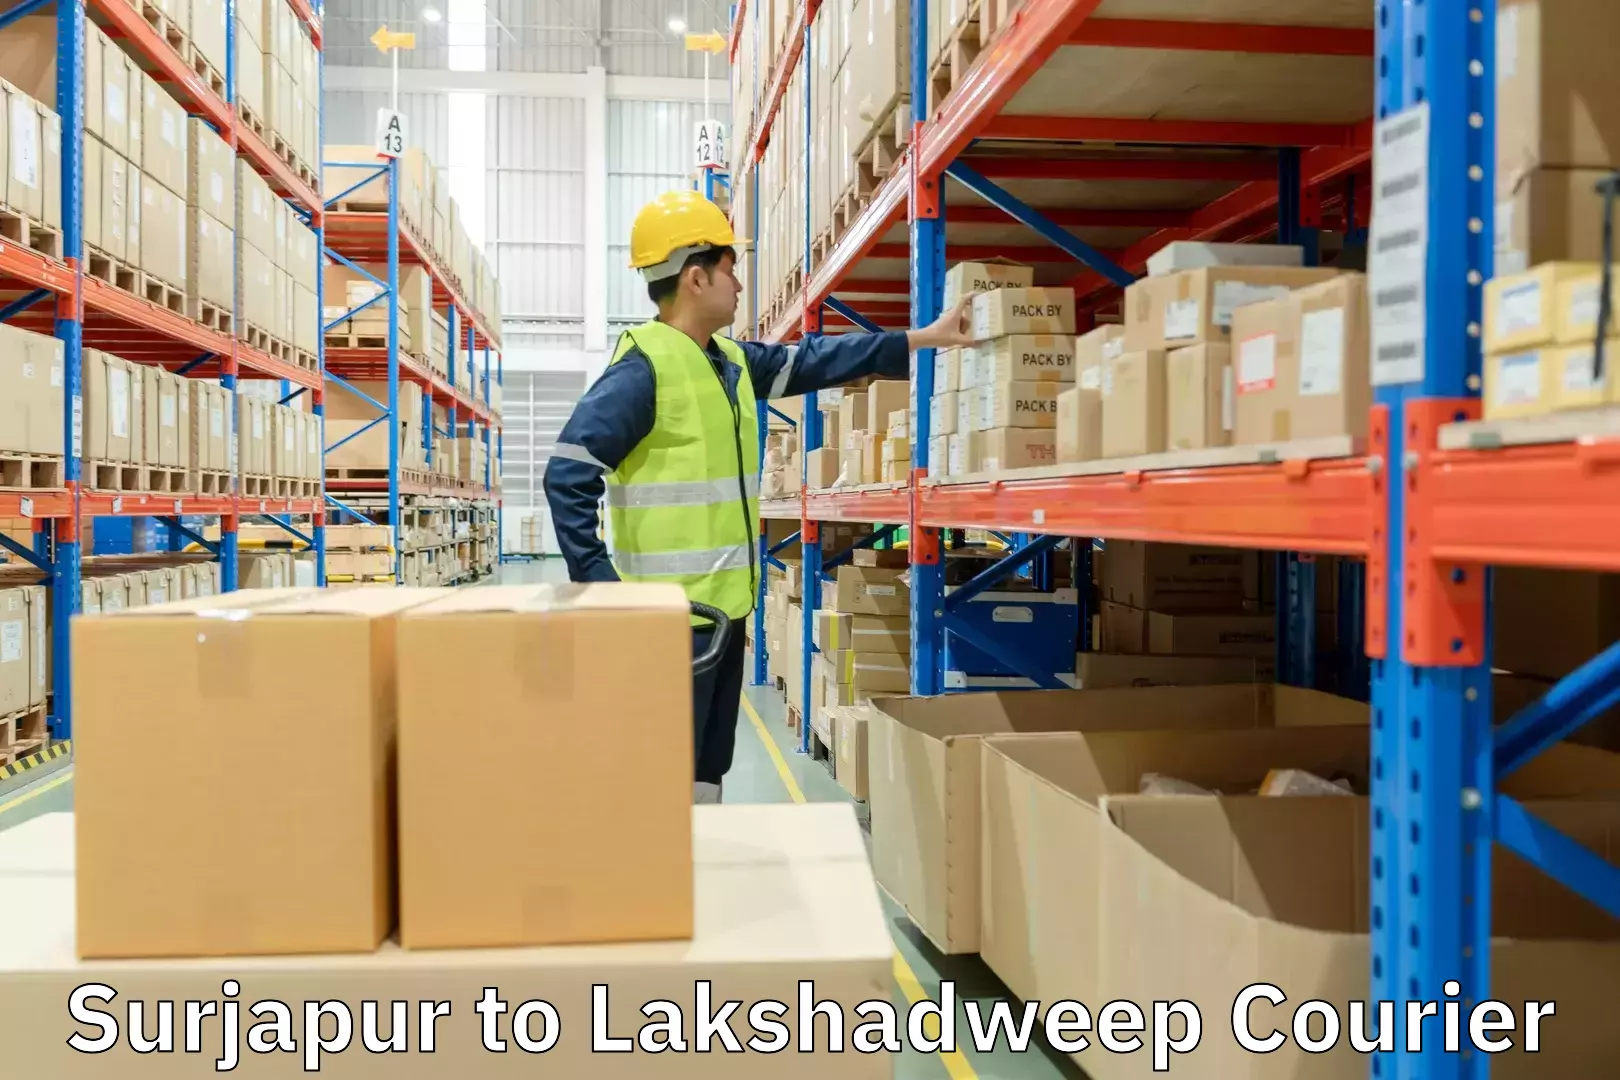 Medical delivery services Surjapur to Lakshadweep